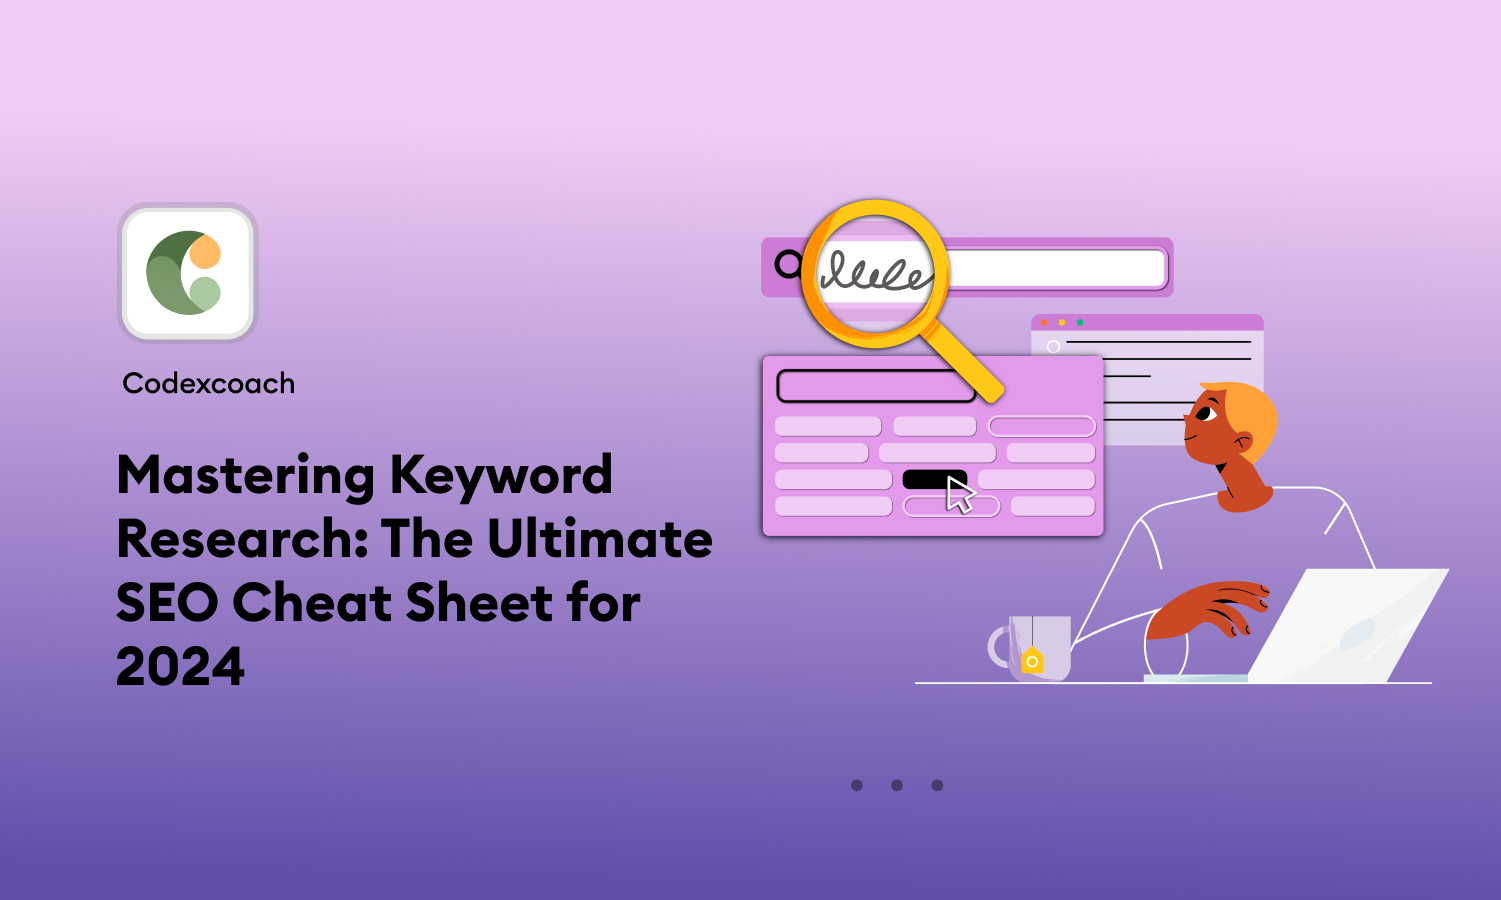 Mastering Keyword Research The Ultimate SEO Cheat Sheet for 2024